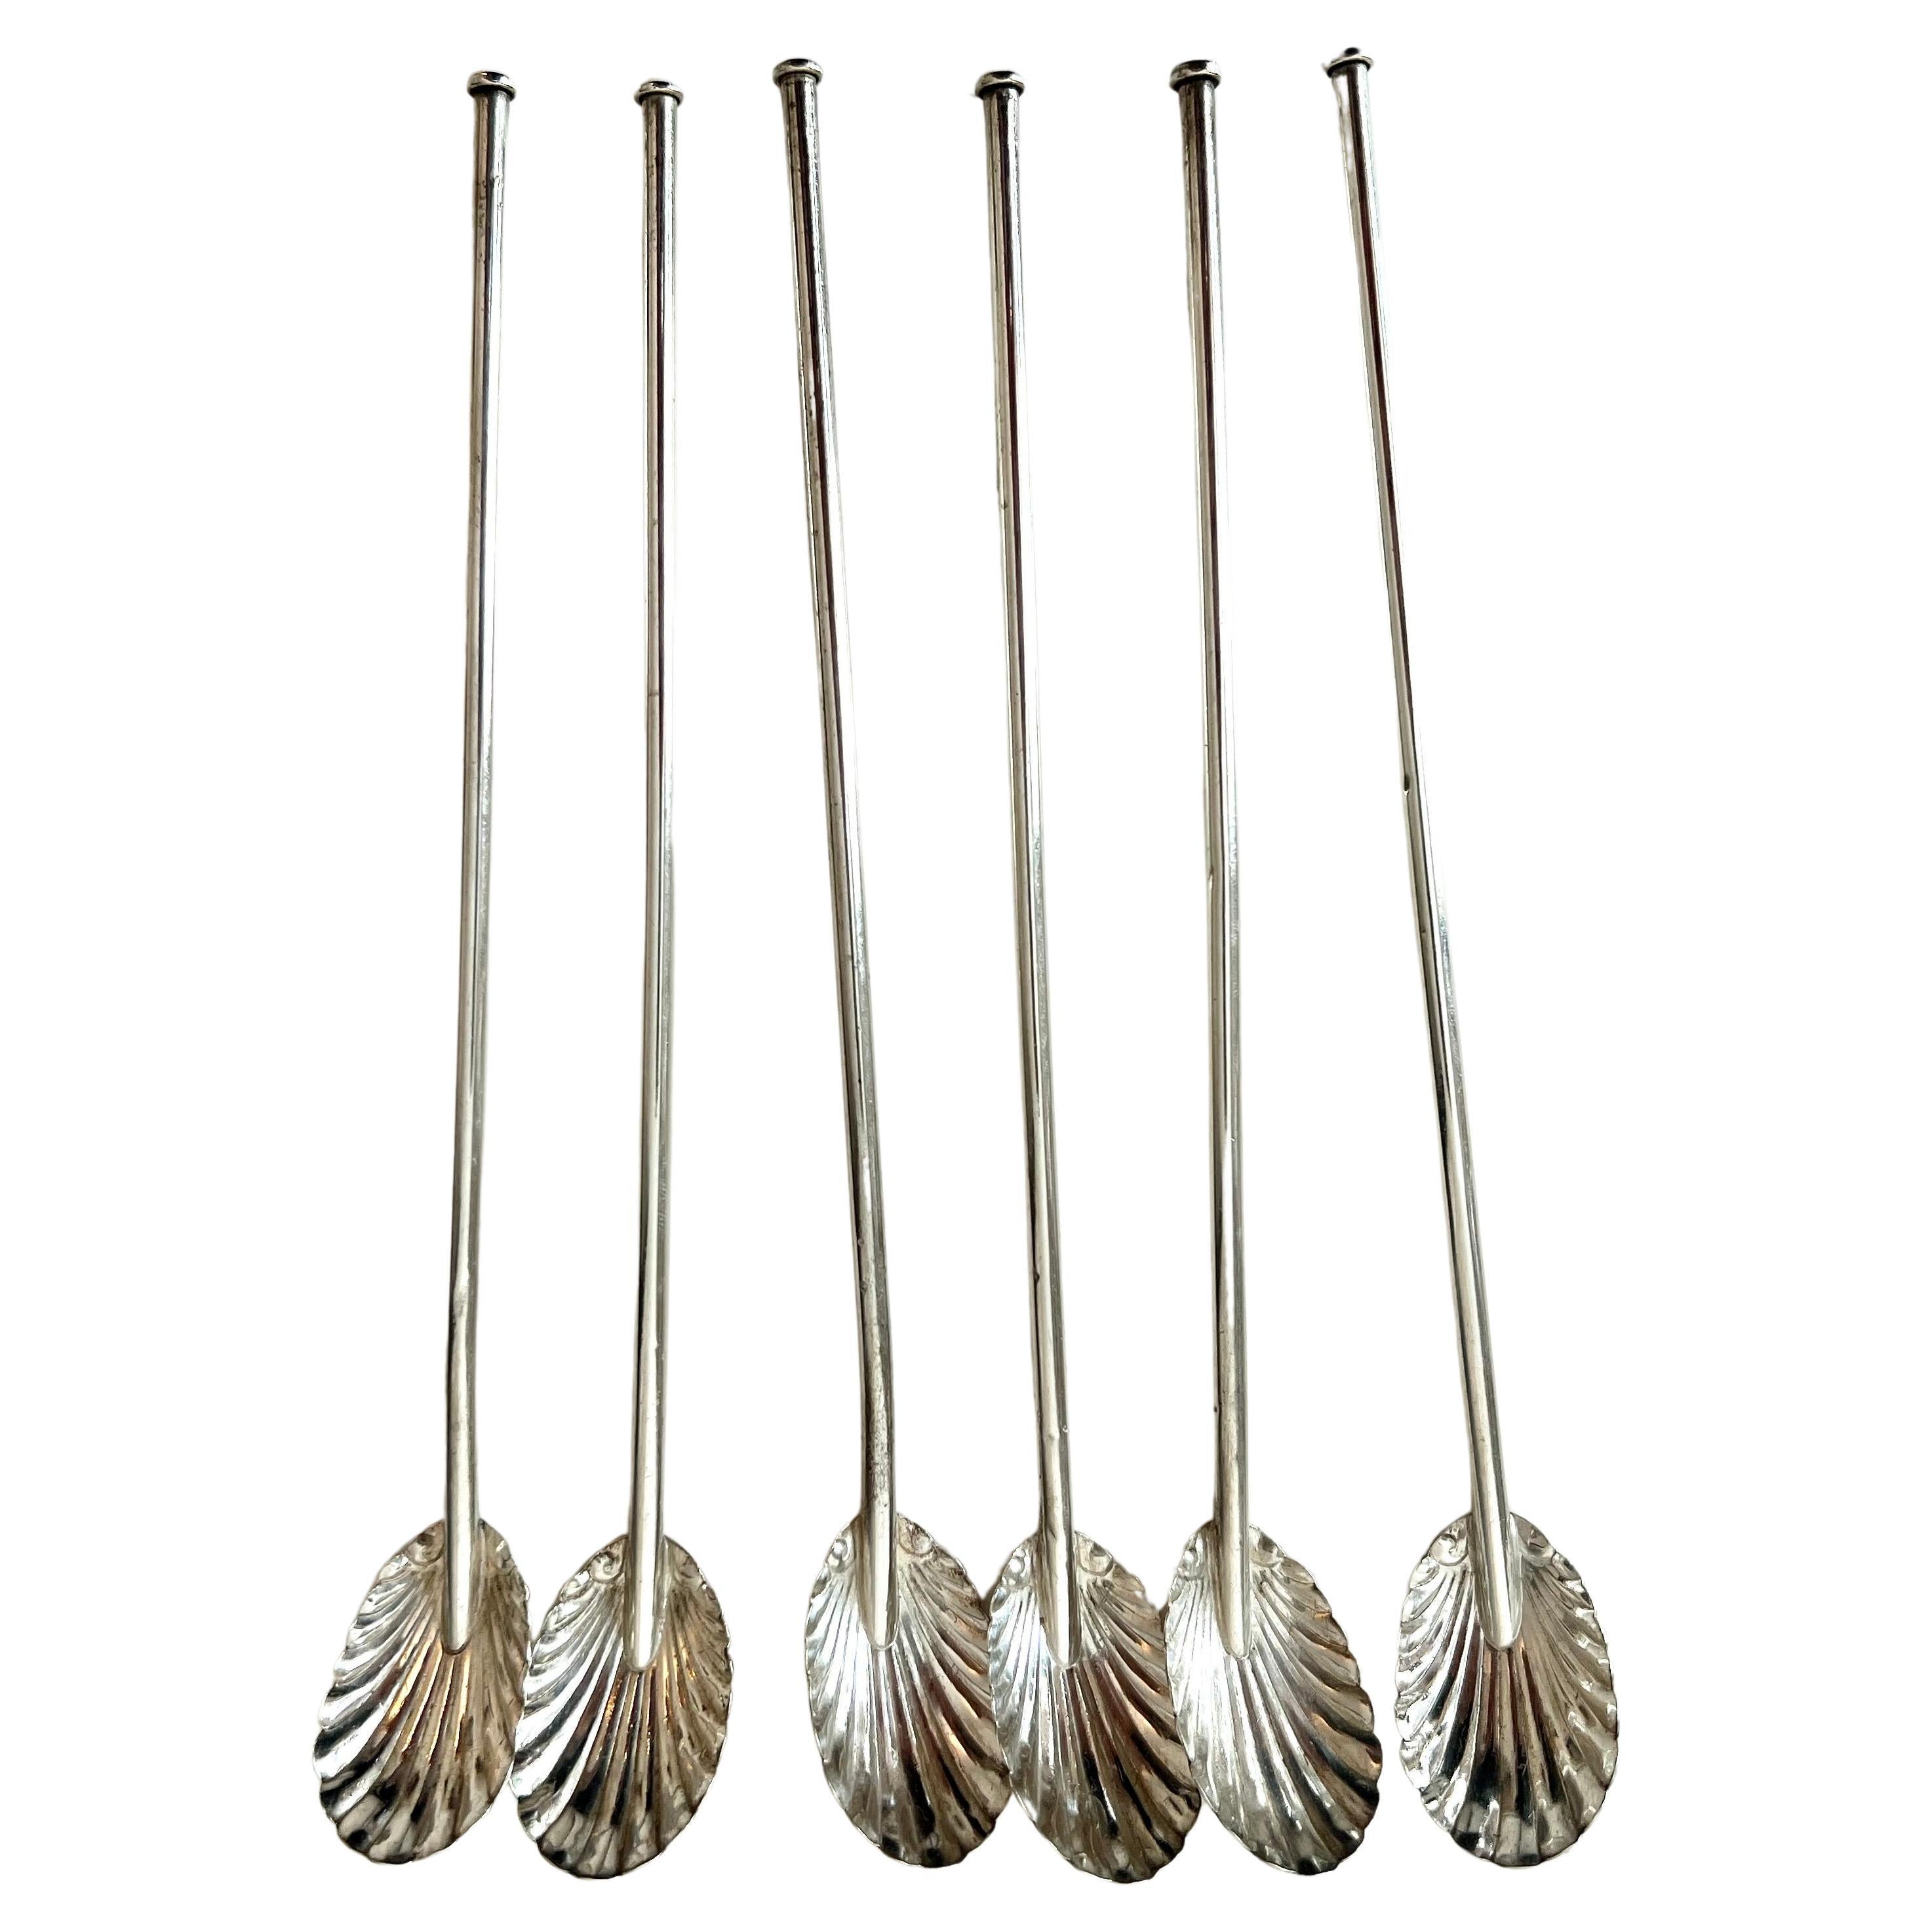 6 French Sterling Iced Tea Scallop Clam Shell Spoons For Sale